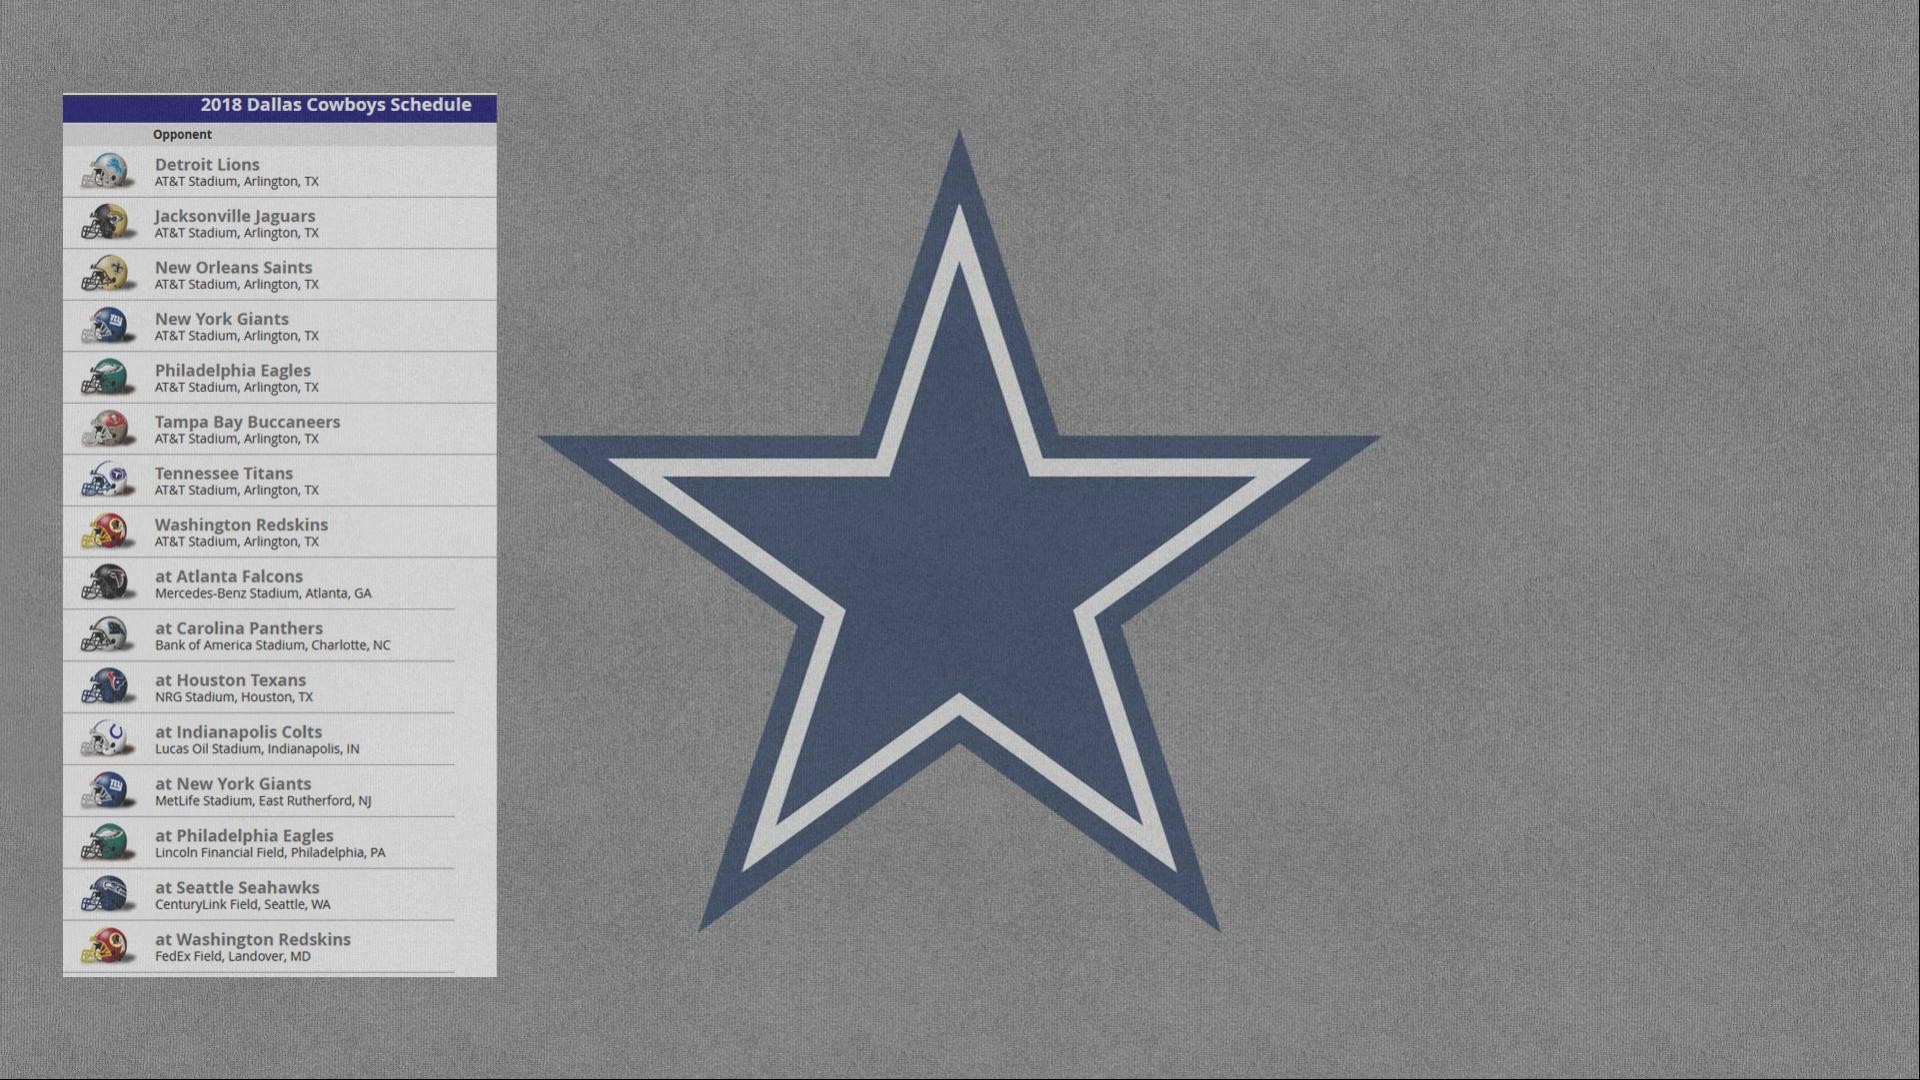 1920x1080 Dallas Cowboys Logo Wallpaper with 2018 Opponents Schedule